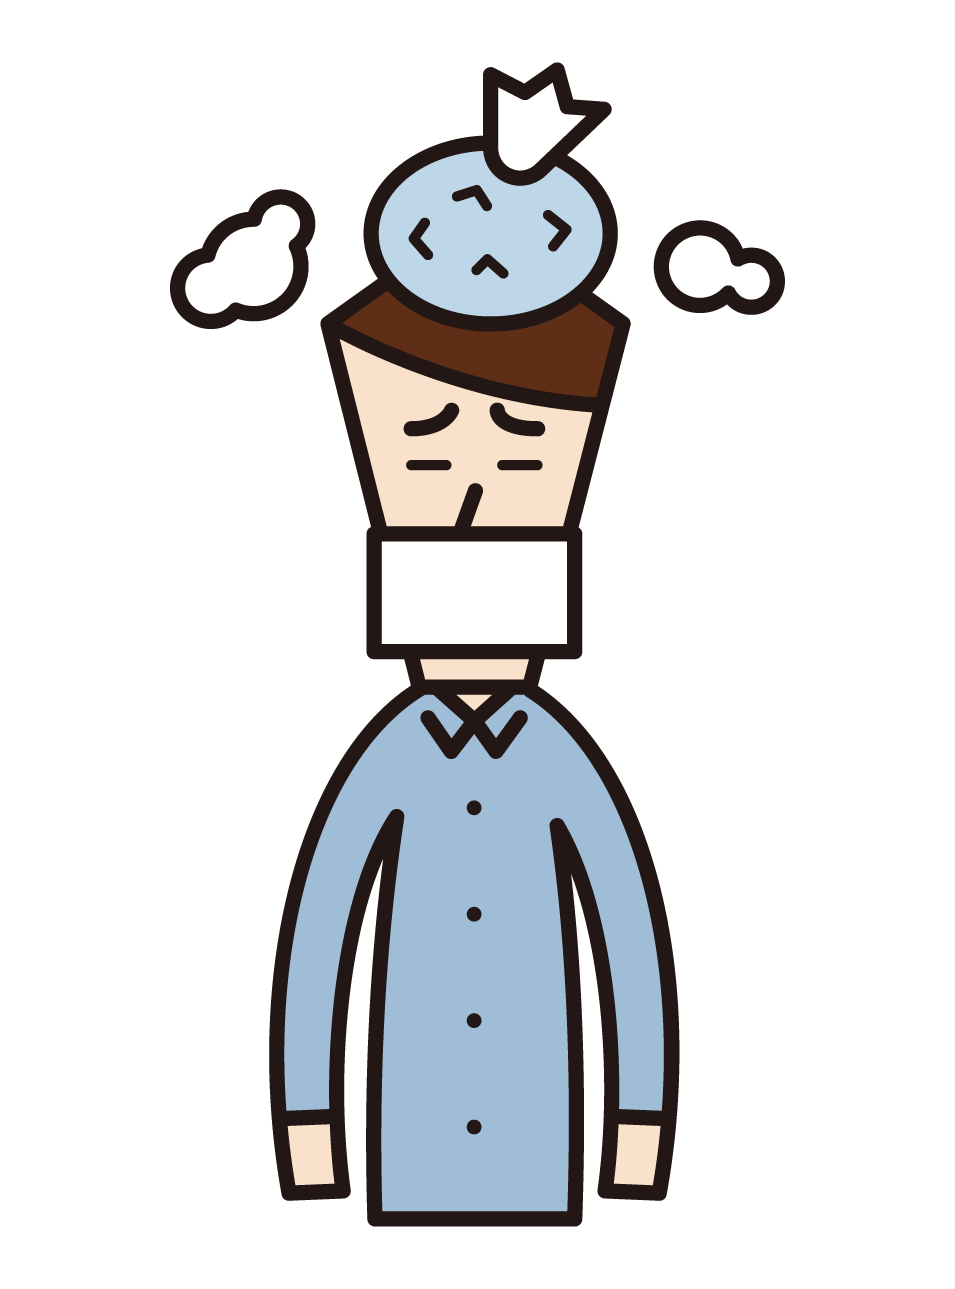 Illustration of a man who has a cold and cools his head